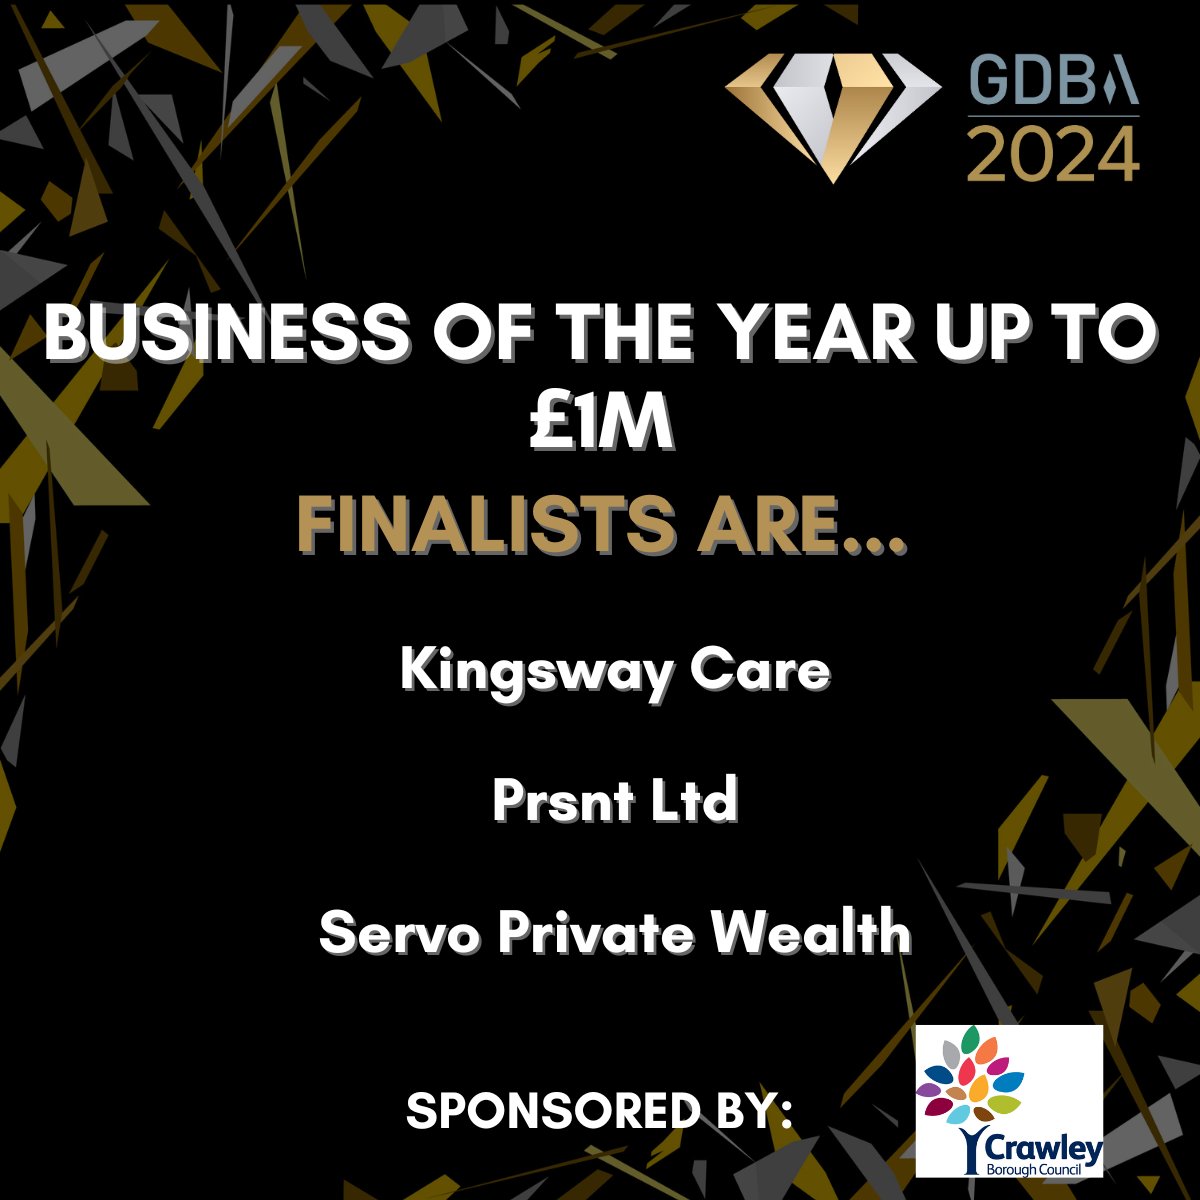 Business of the Year (up to £1m turnover), sponsored by @crawleybc Congratulations to the finalists: 🏆 @KingswayCare 🏆 Prsnt 🏆 Servo Private Wealth 👉🏼View the full shortlist here: lnkd.in/ezw5HKc8